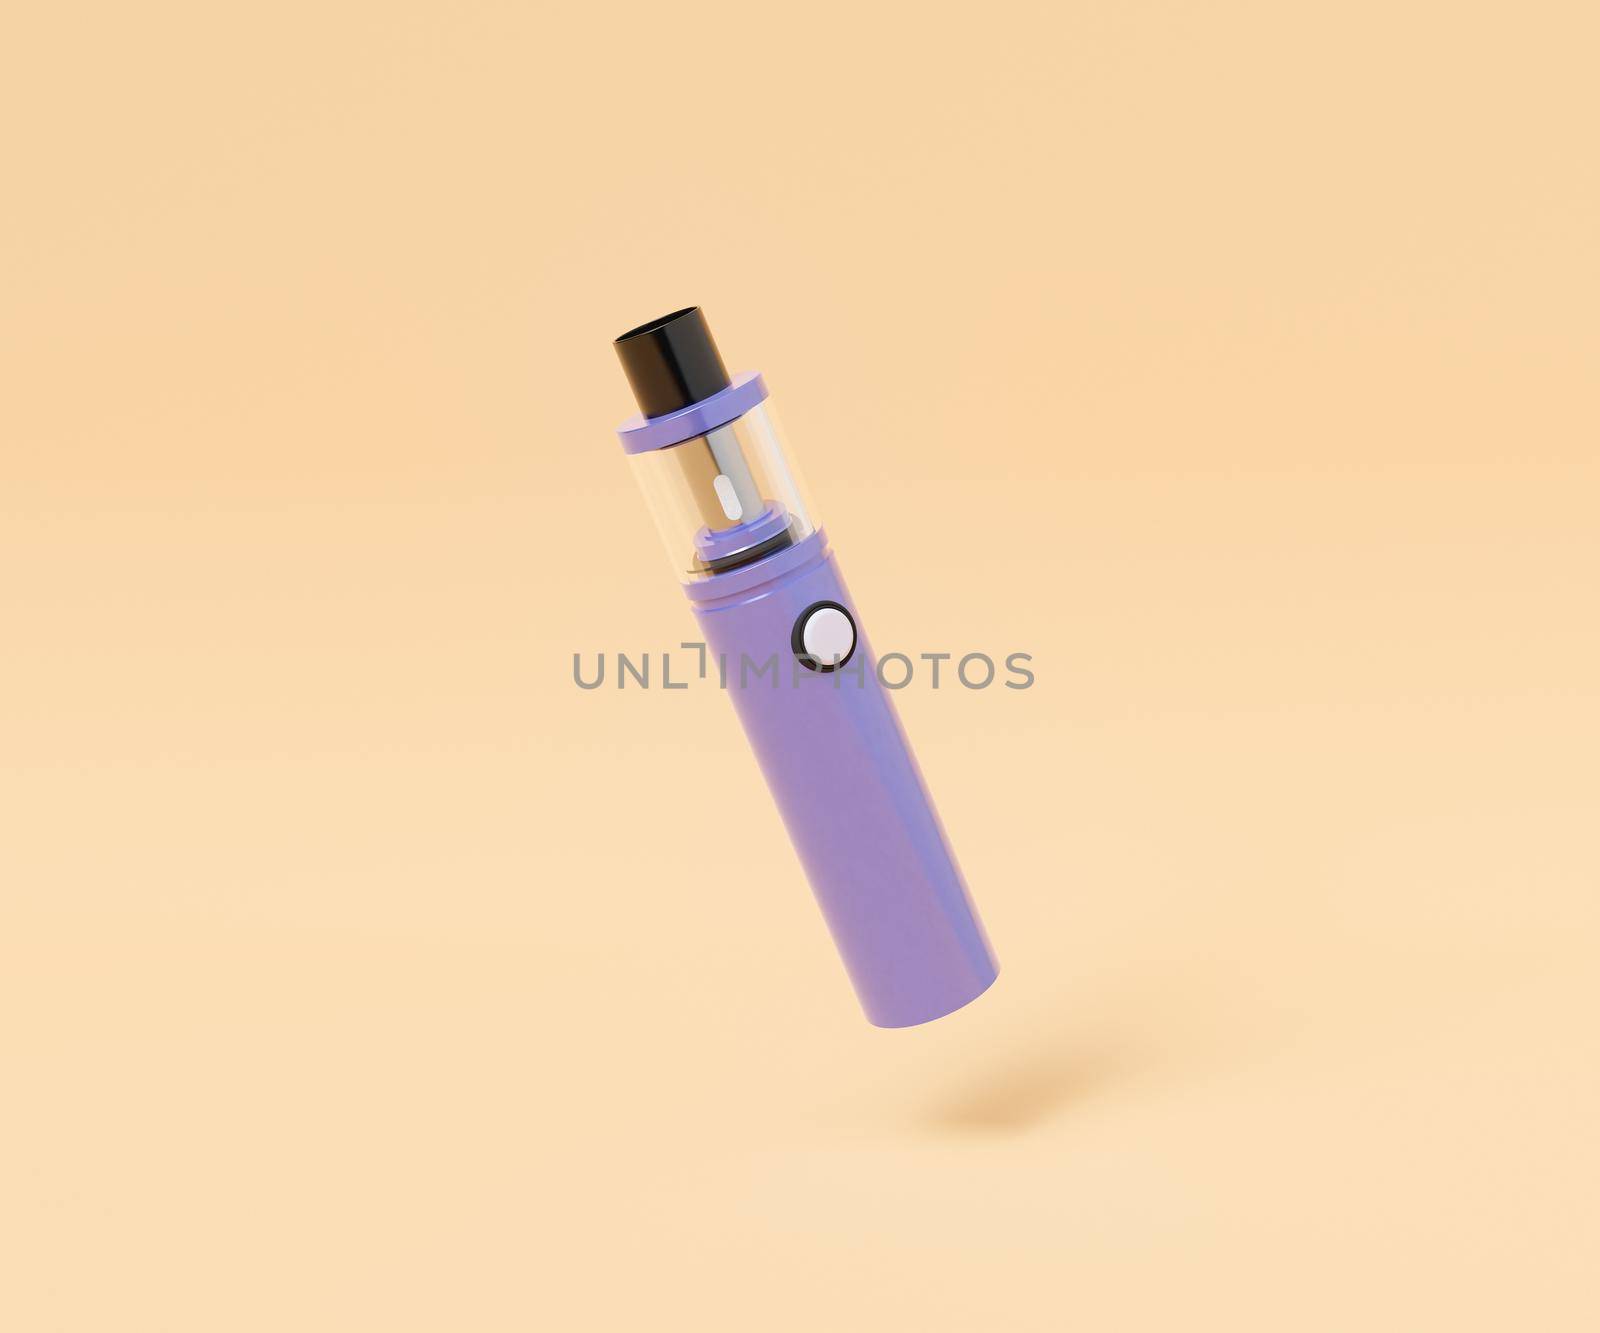 Violet electronic cigarette against yellow background by asolano